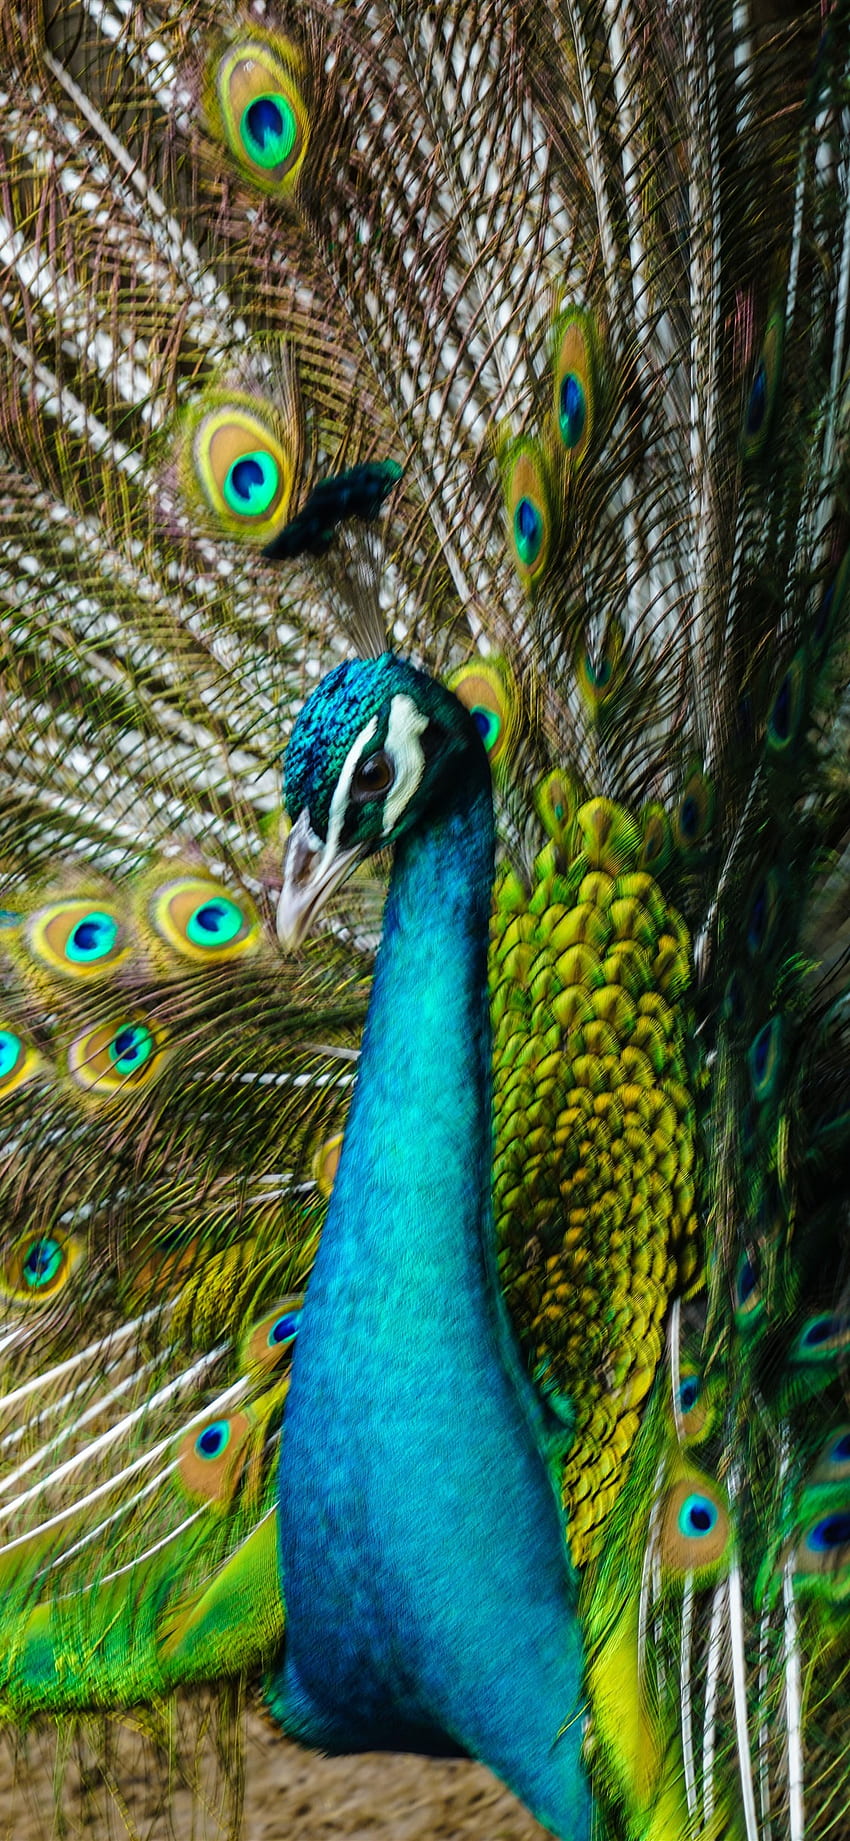 iPhone Peacock, Tail Open, Beautiful Feathers - iPhone Xs Max Peacock HD phone wallpaper